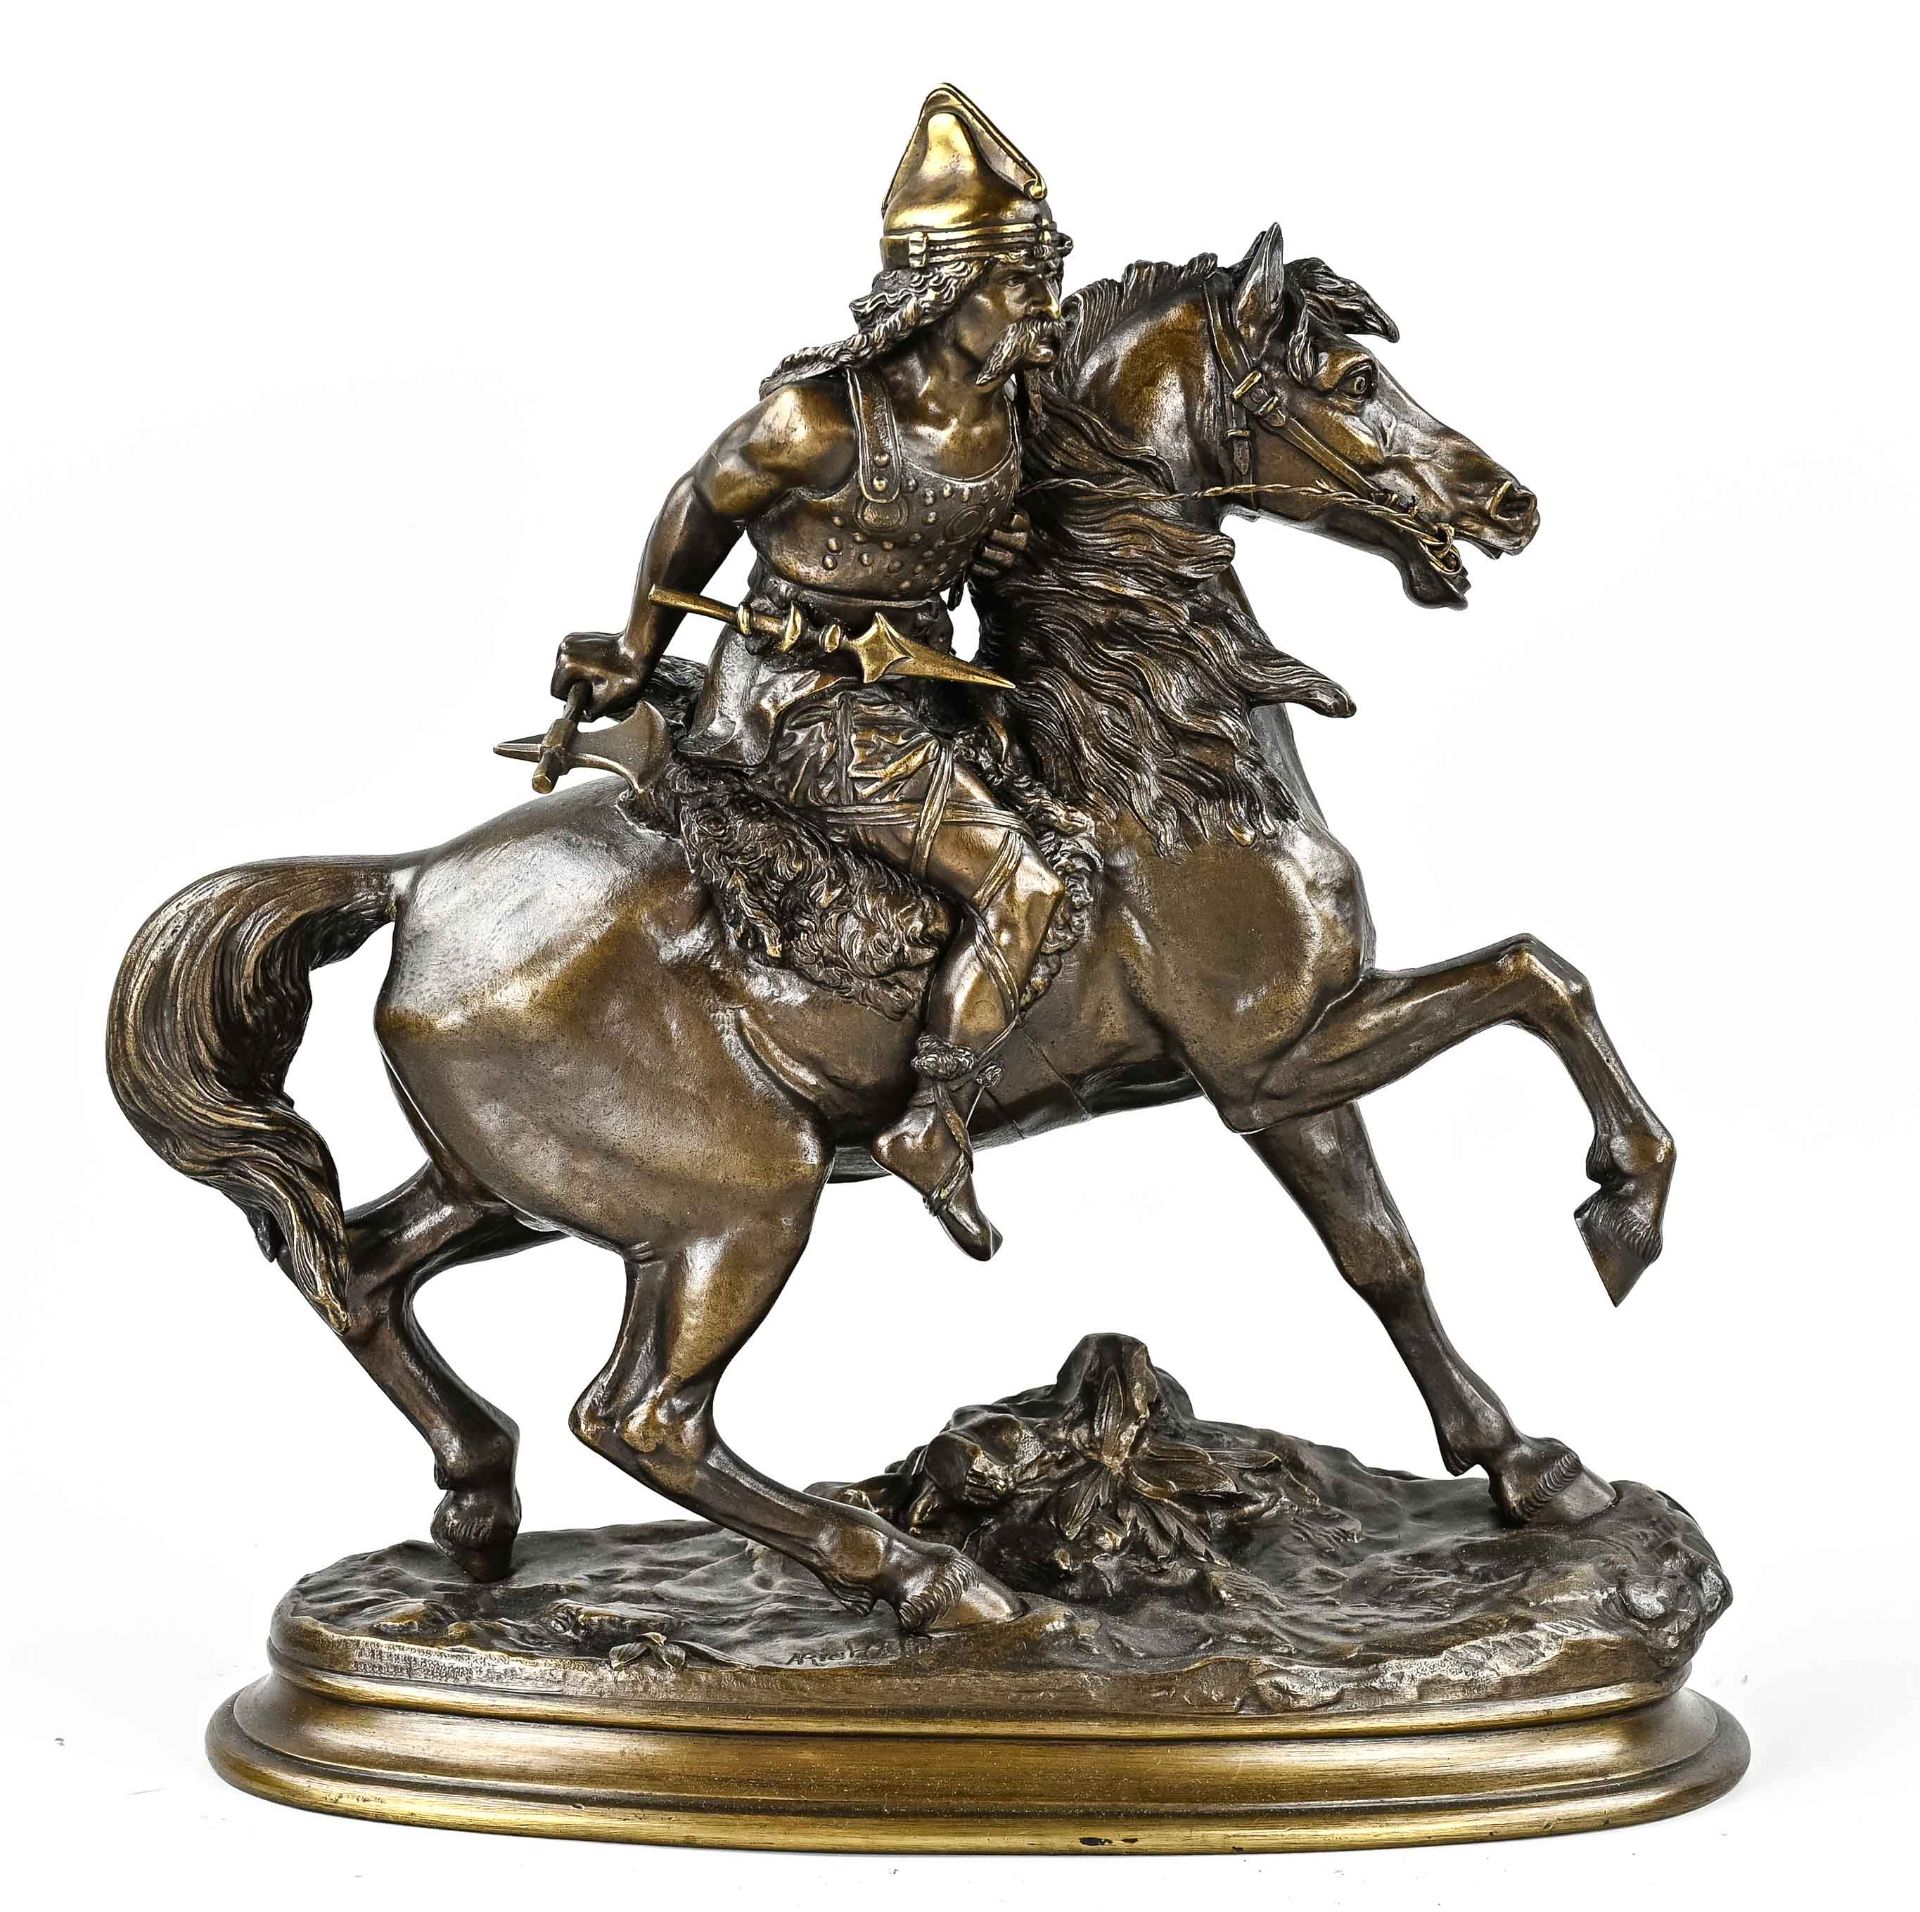 Antique French bronze sculpture by A. Richard